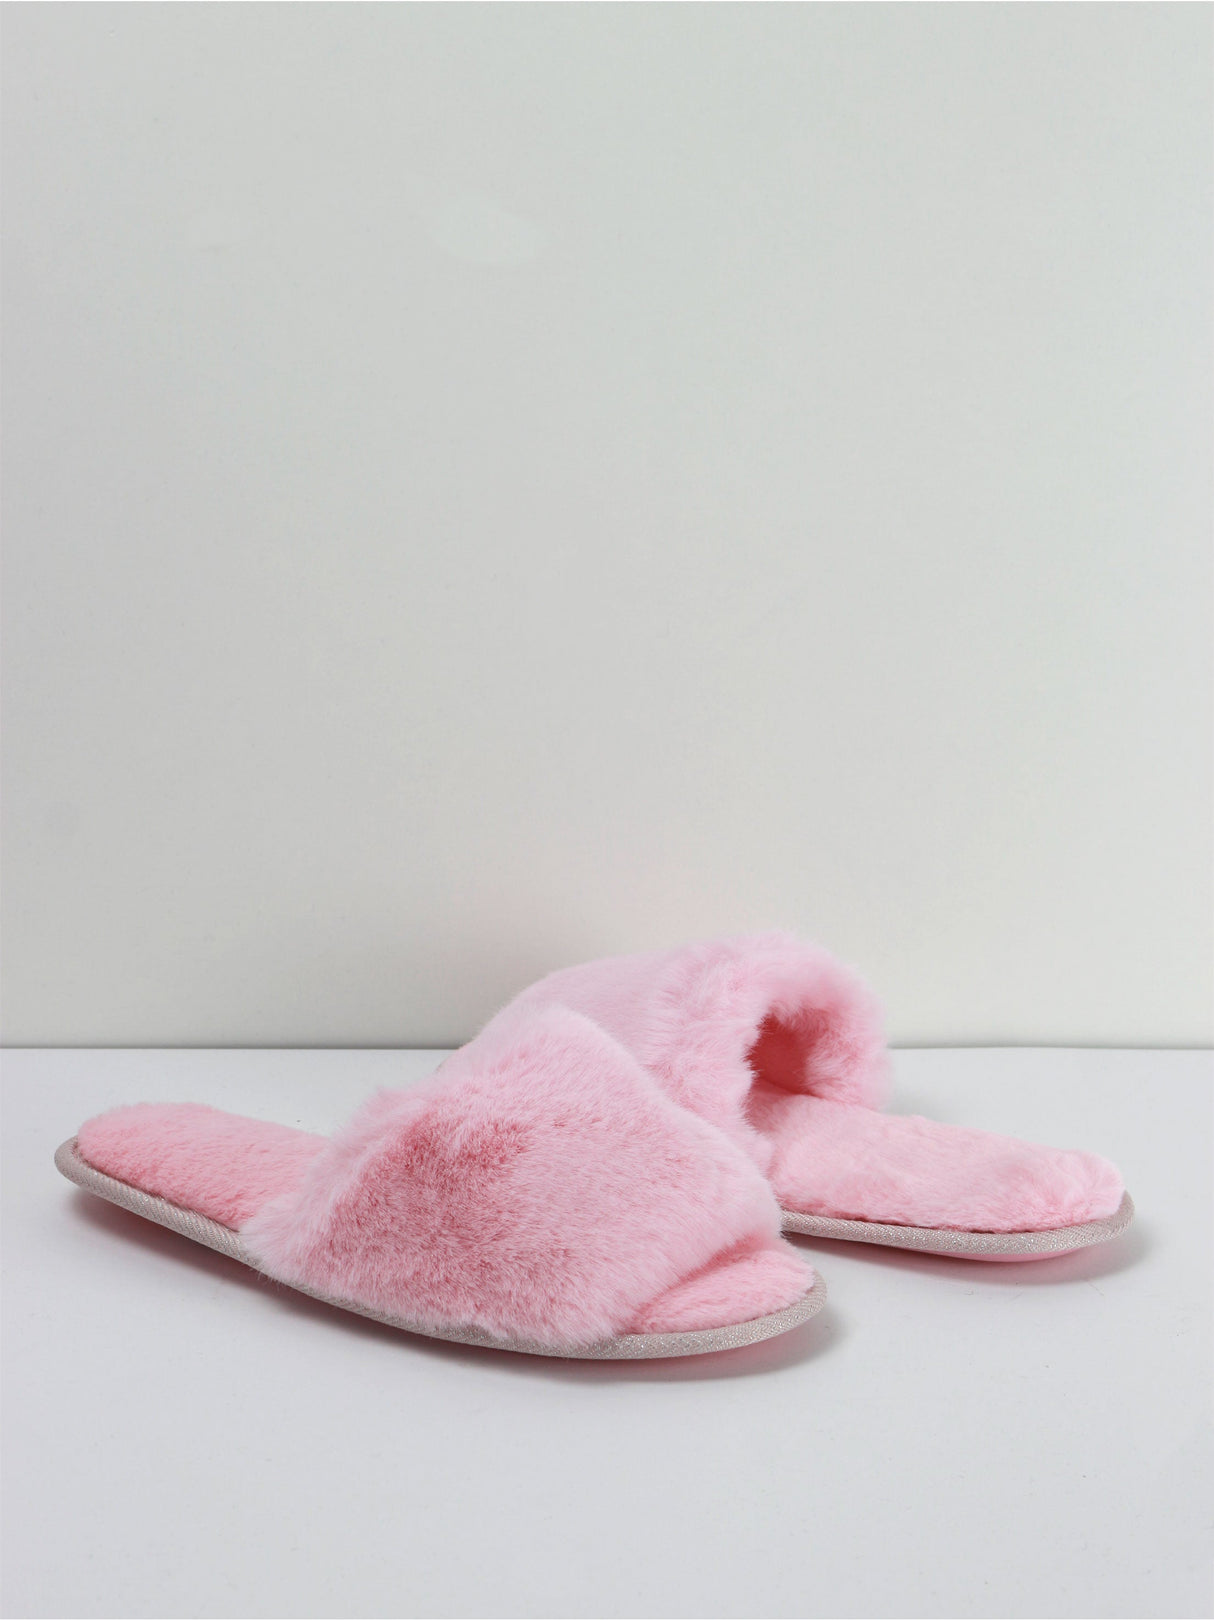 Image for Women's Faux Fur Slip-On Slippers,Pink